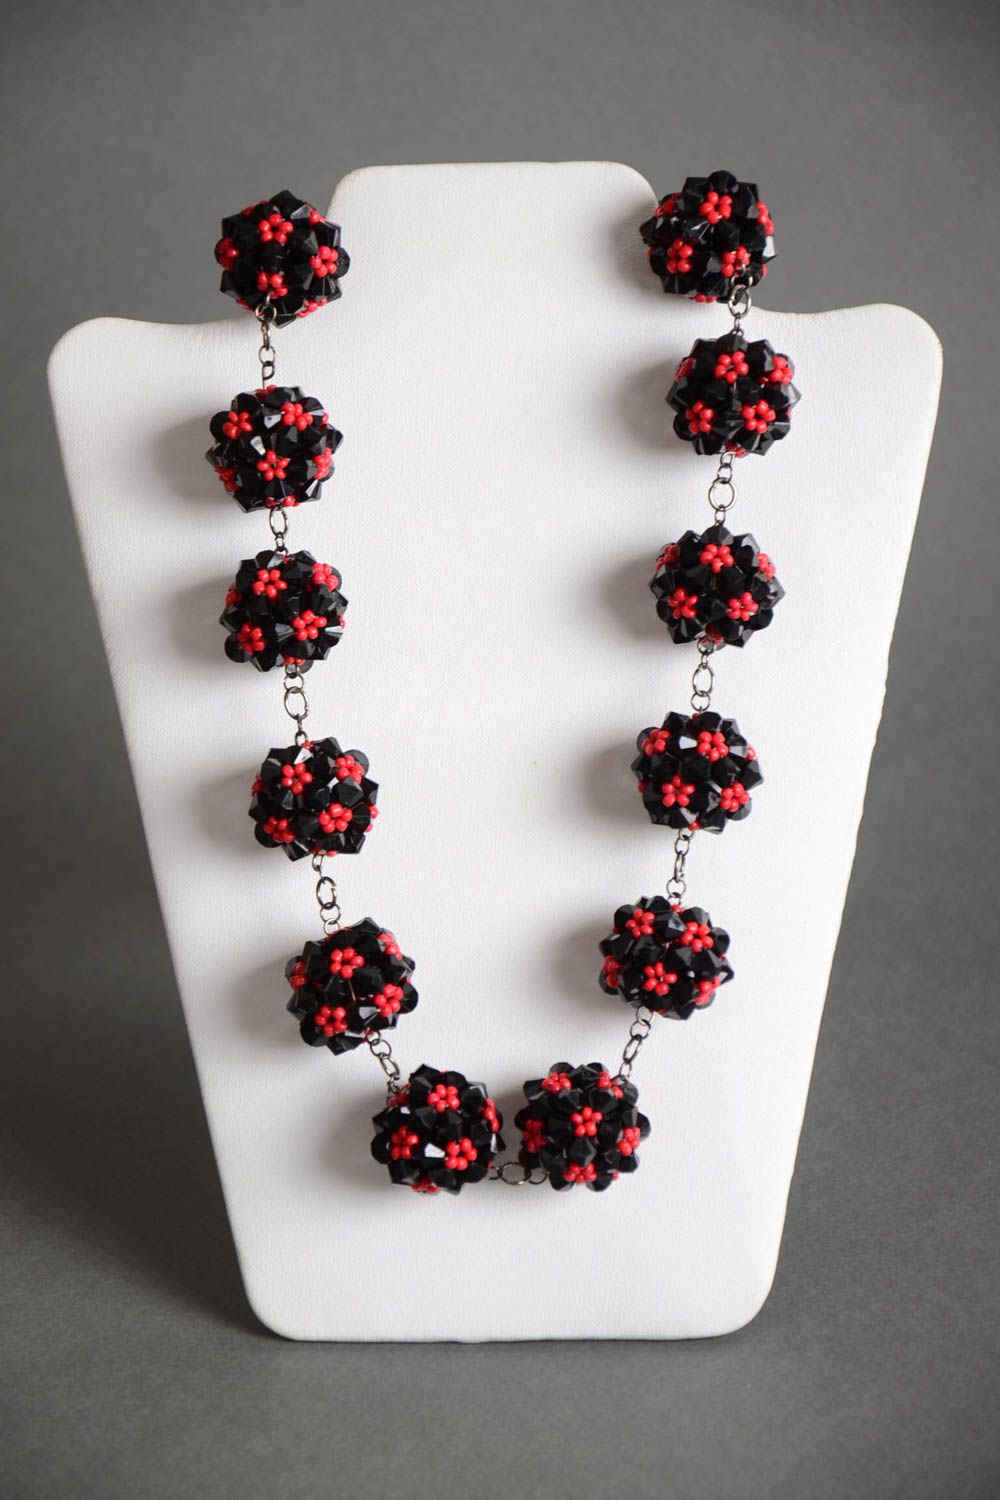 Handmade designer women's necklace crocheted of red and black Czech beads photo 2